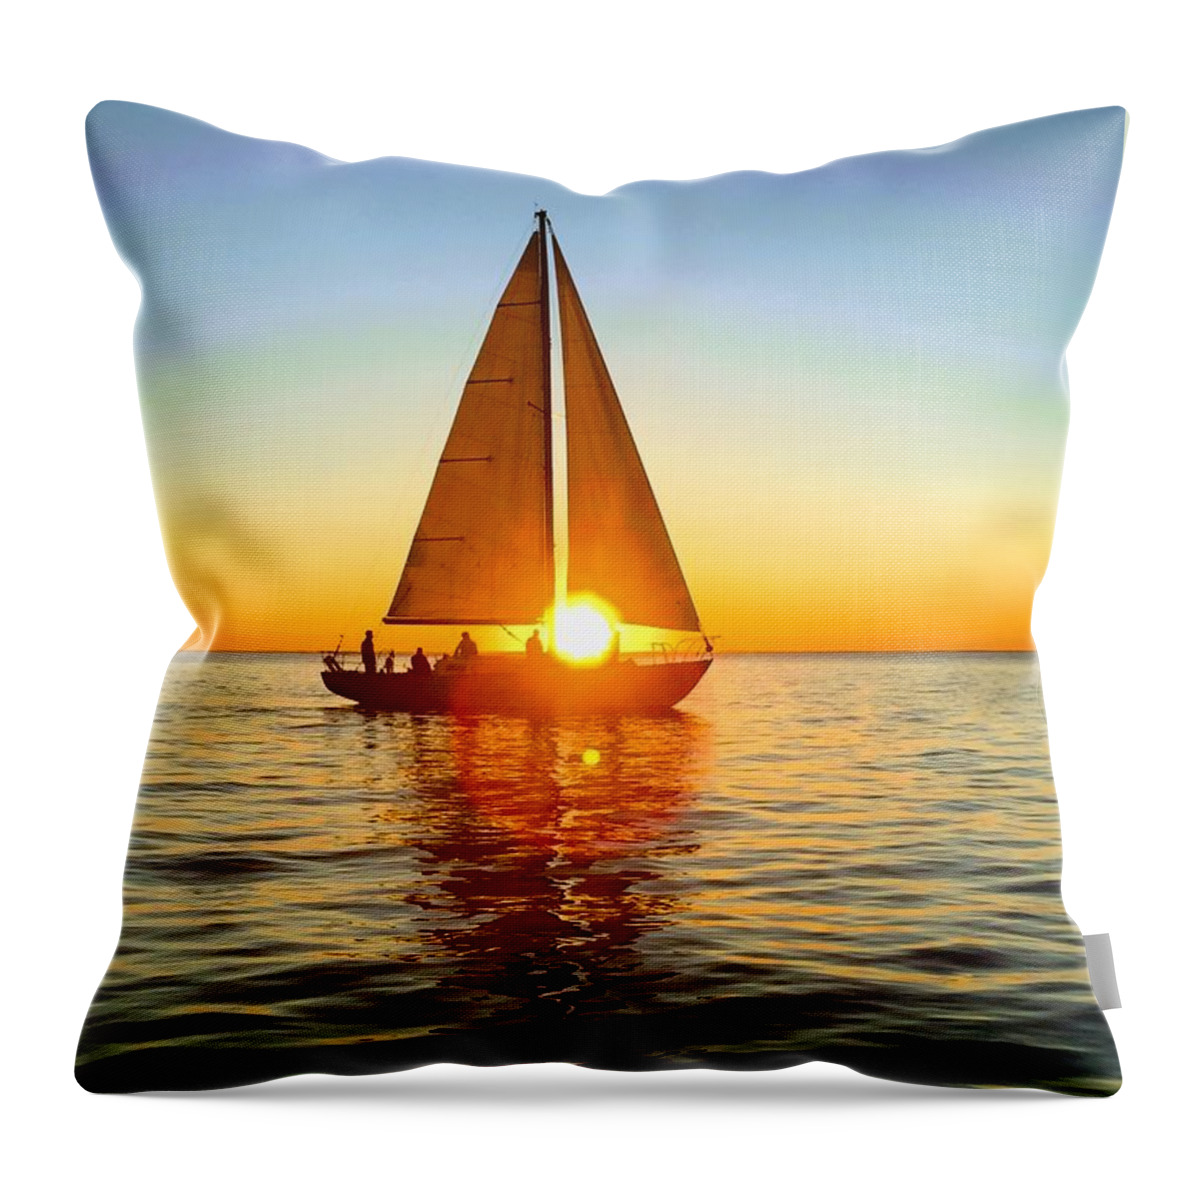 Sailboat Throw Pillow featuring the photograph Sunset Sail by David T Wilkinson